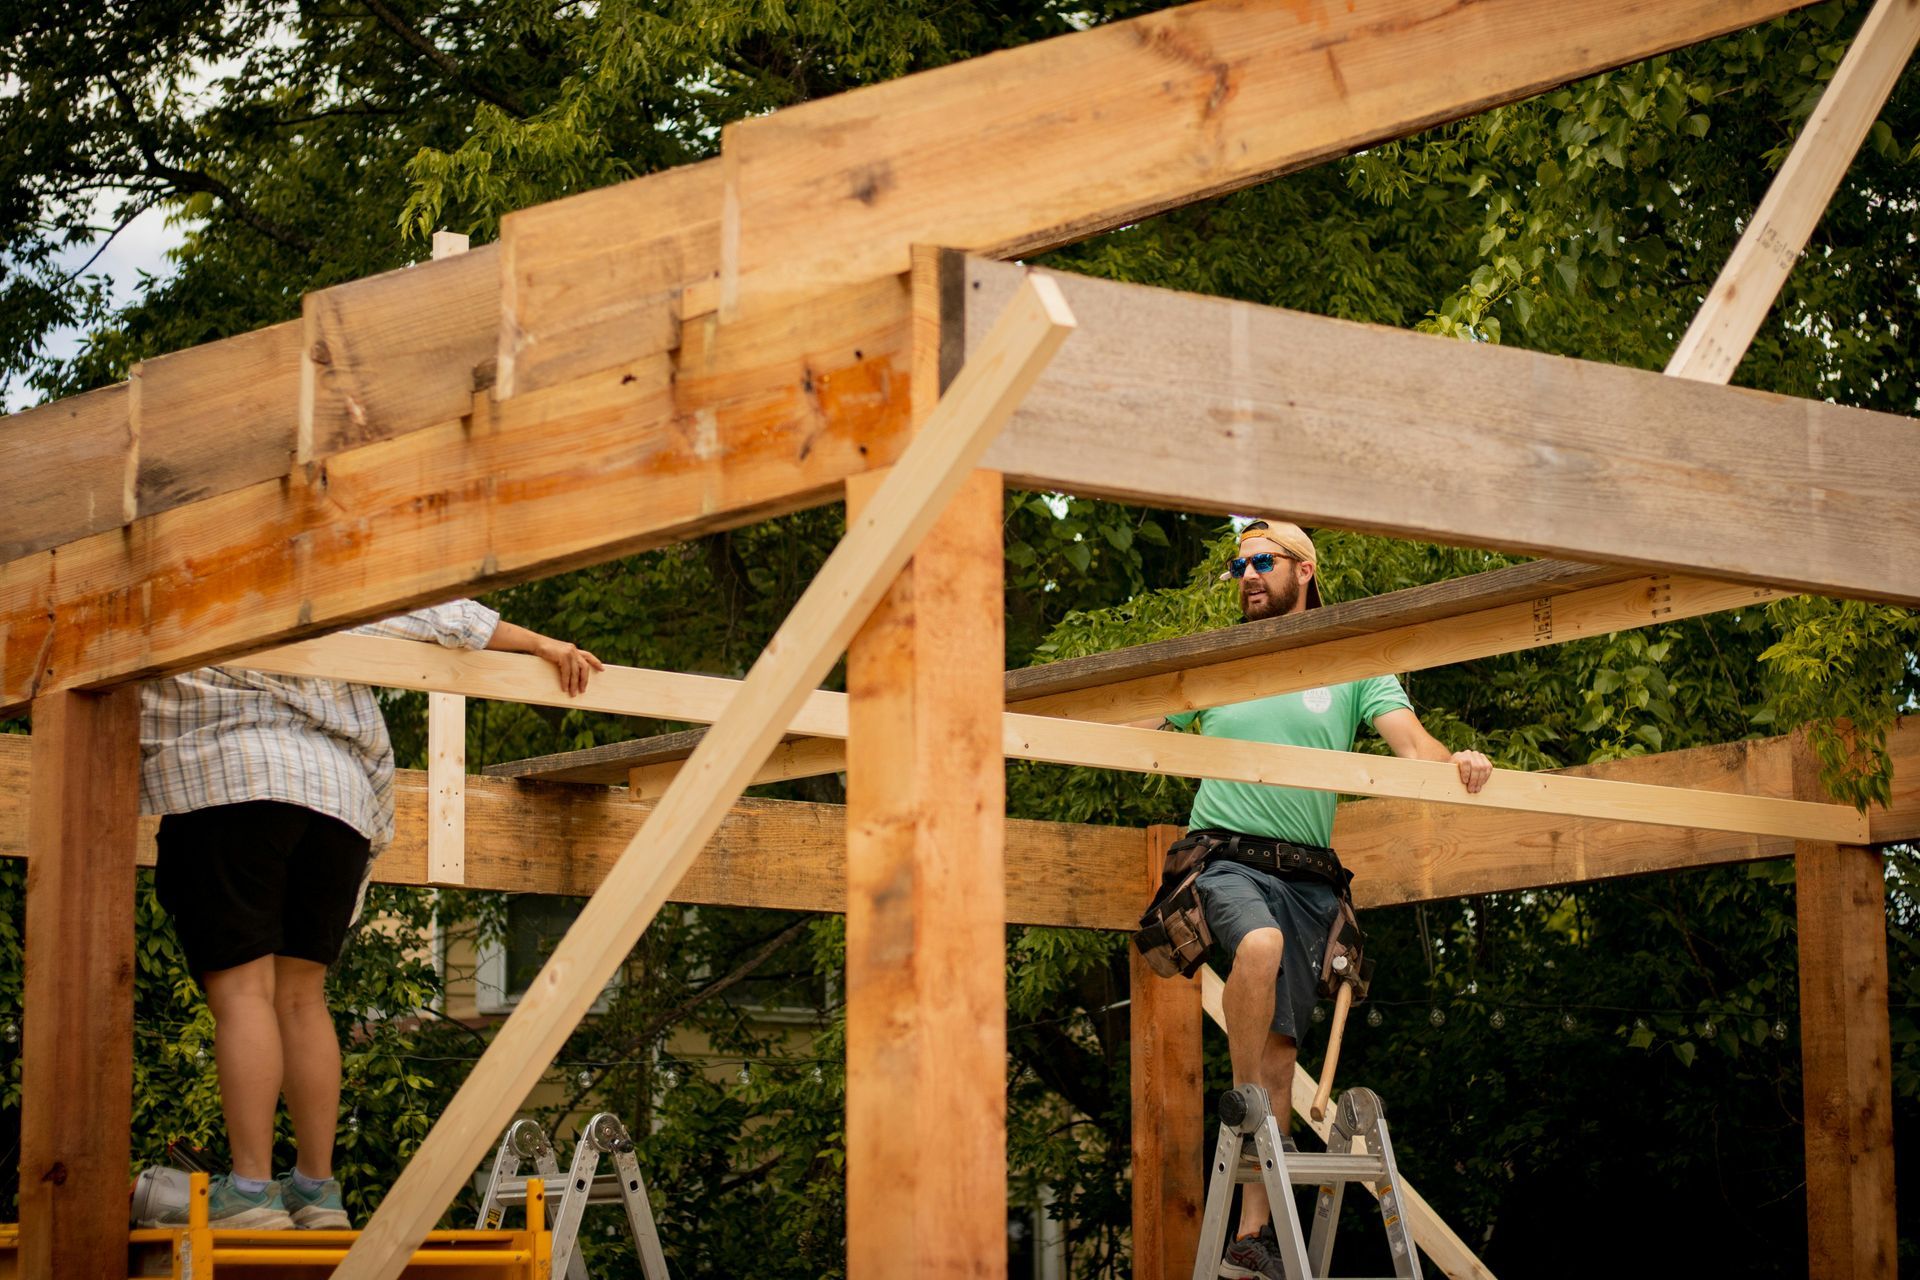 a man in a green shirt is working on a wooden structure